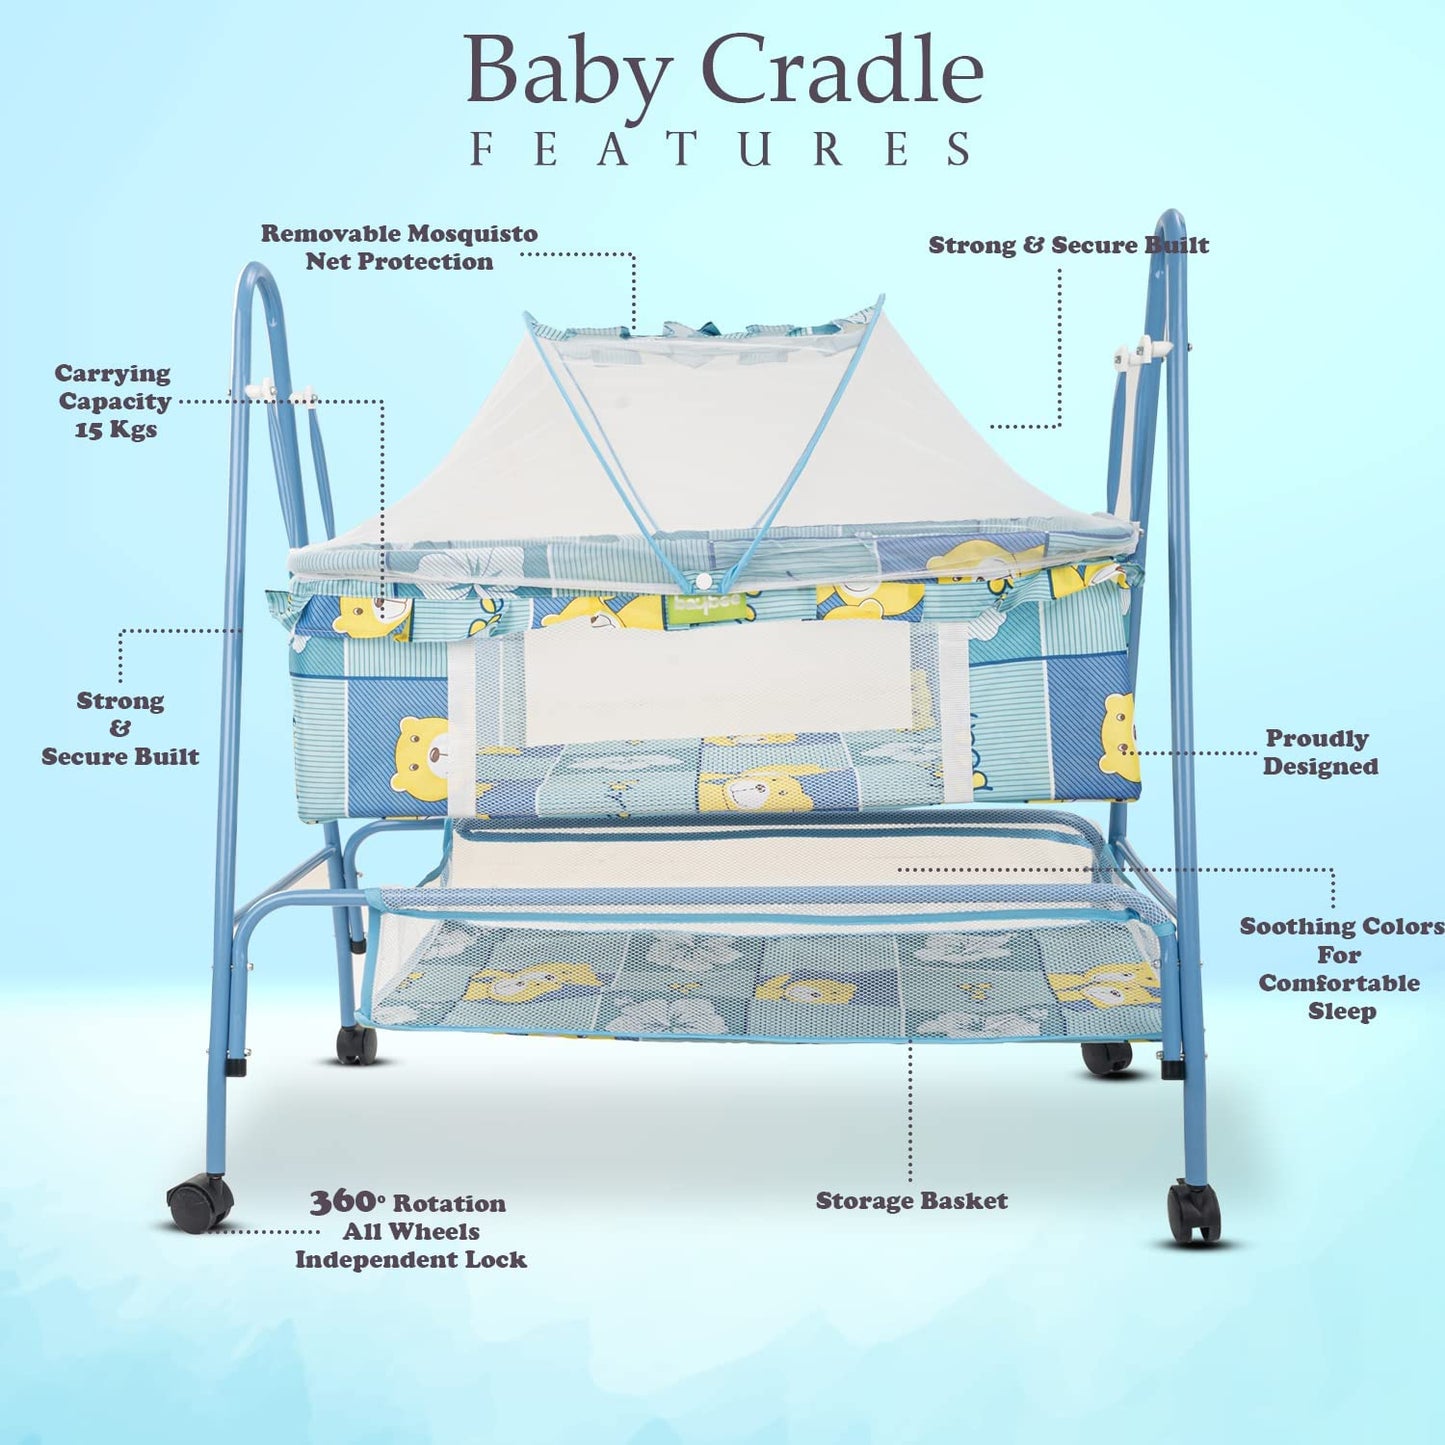 BAYBEE Arise Baby Swing Cradle for Baby with Mosquito Net, Palna Jhula for Baby